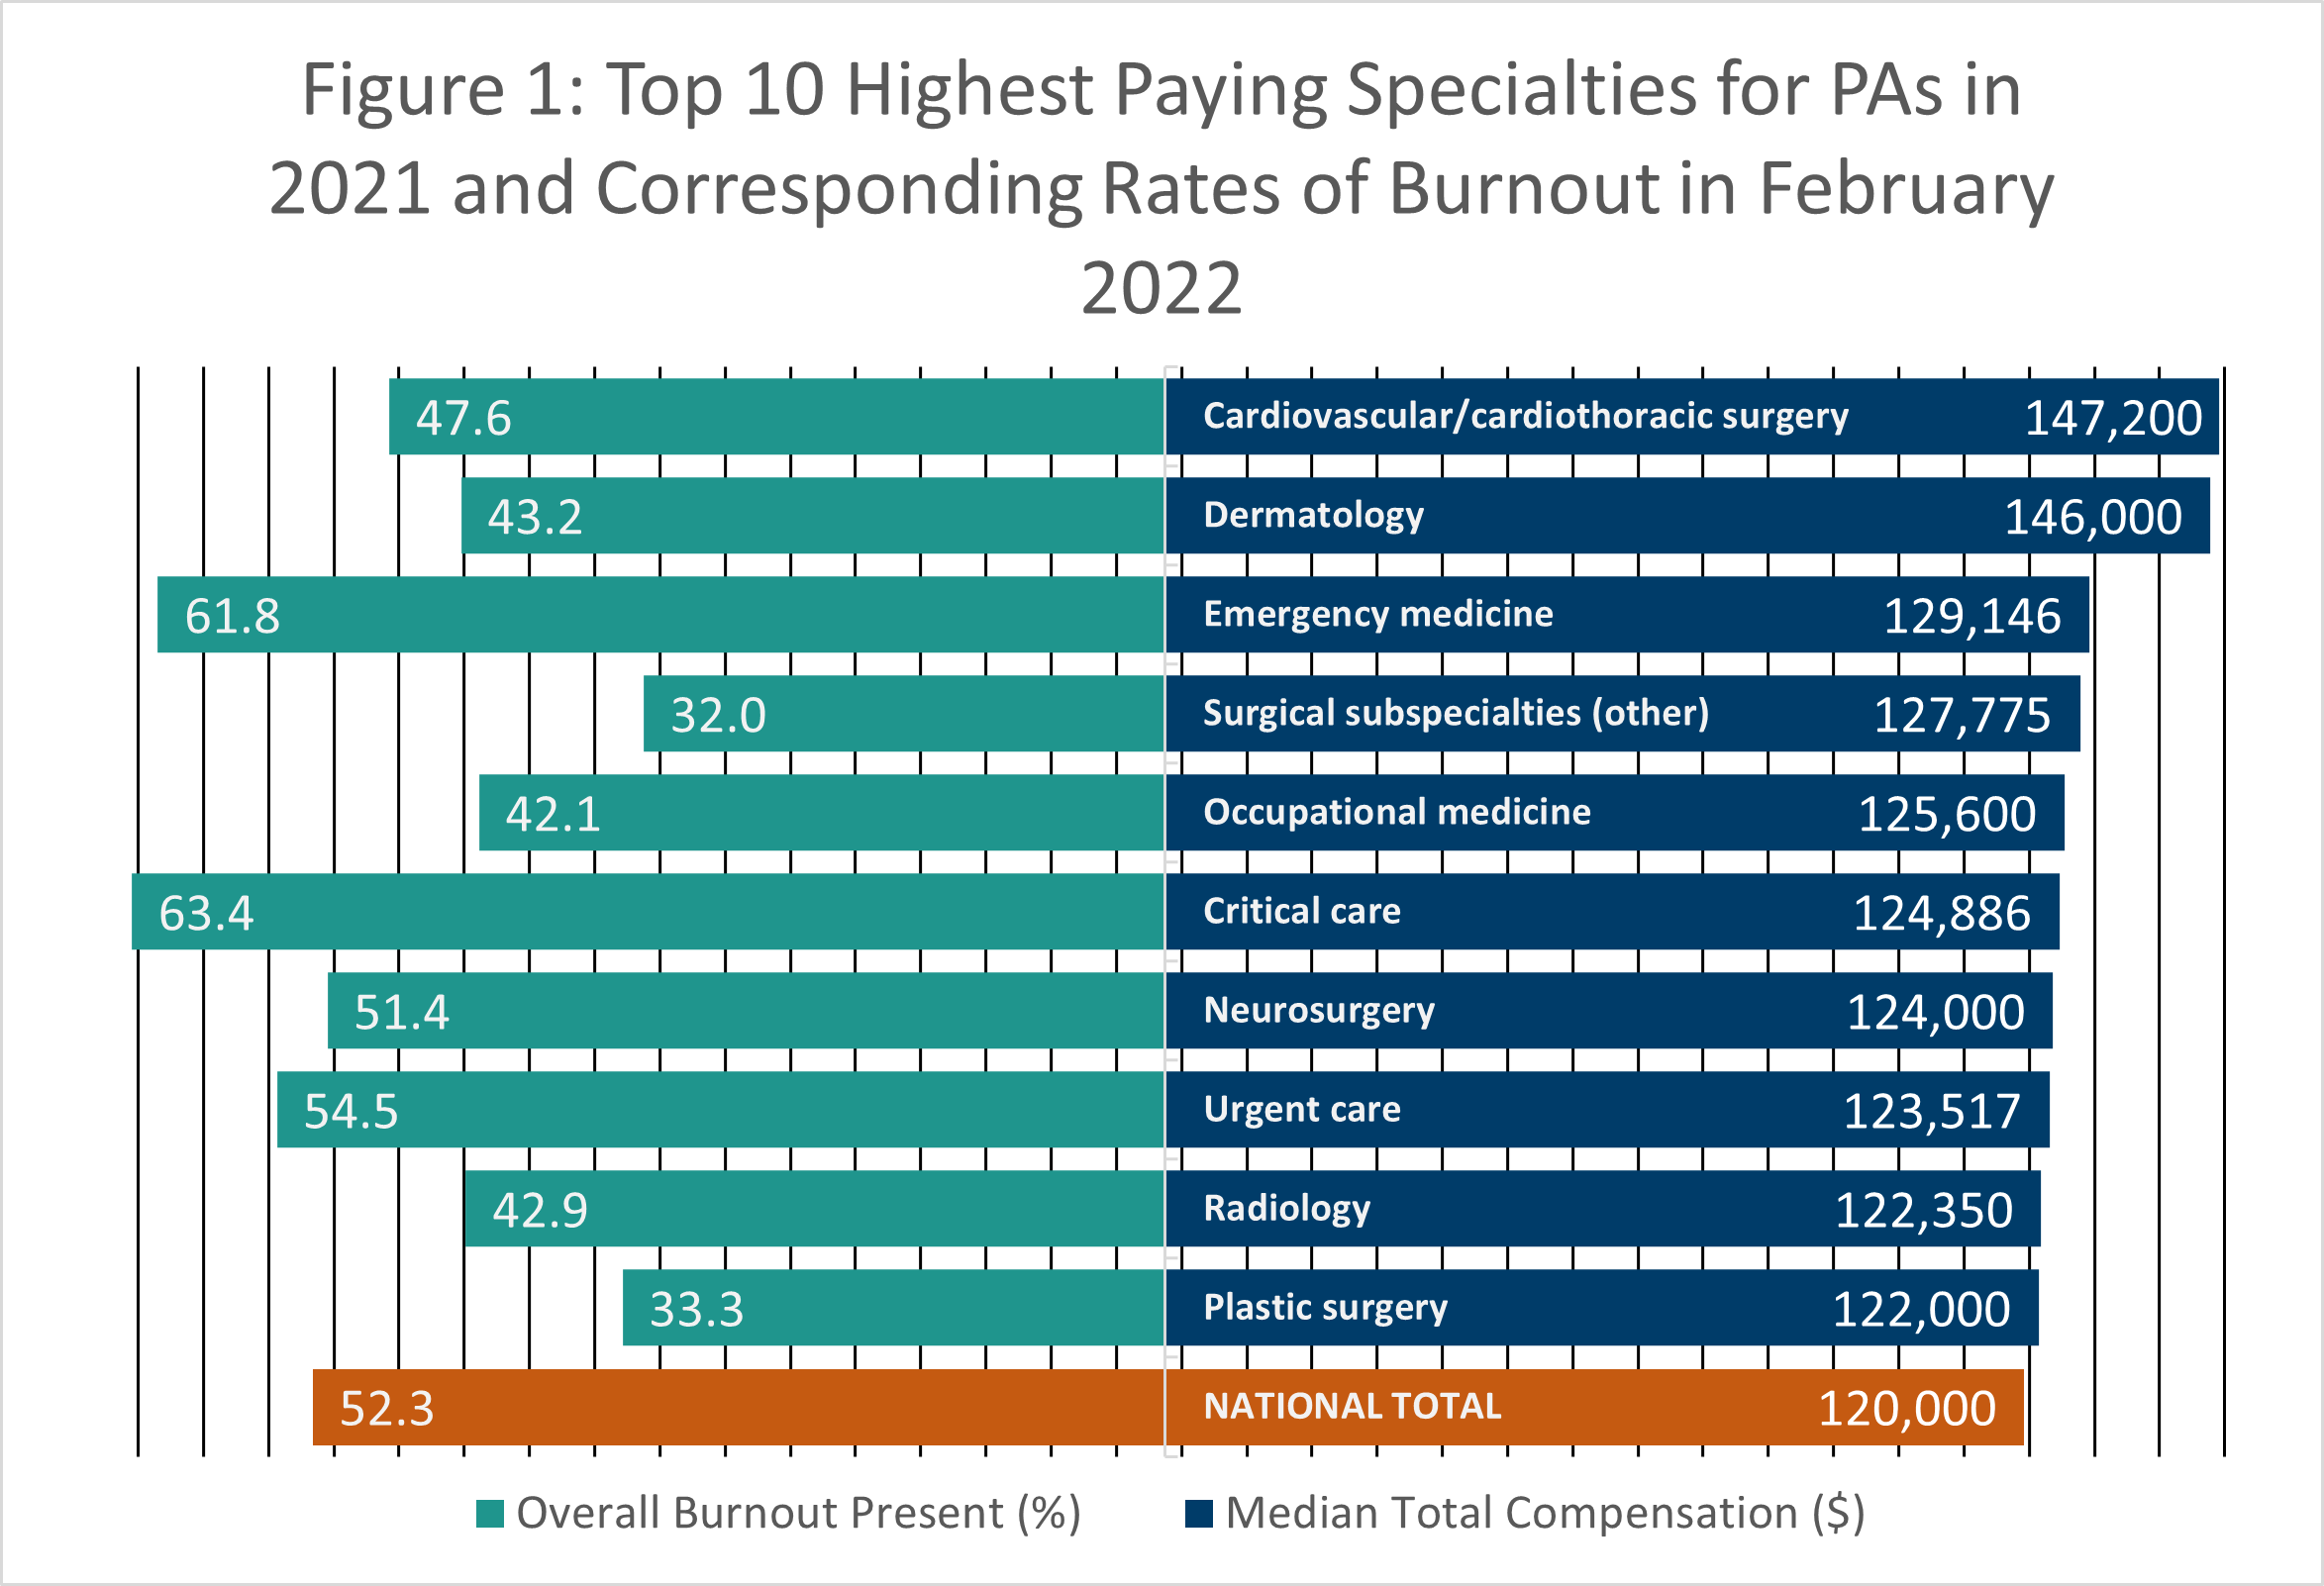 Bar graph representation of top 10 highest paying specialties